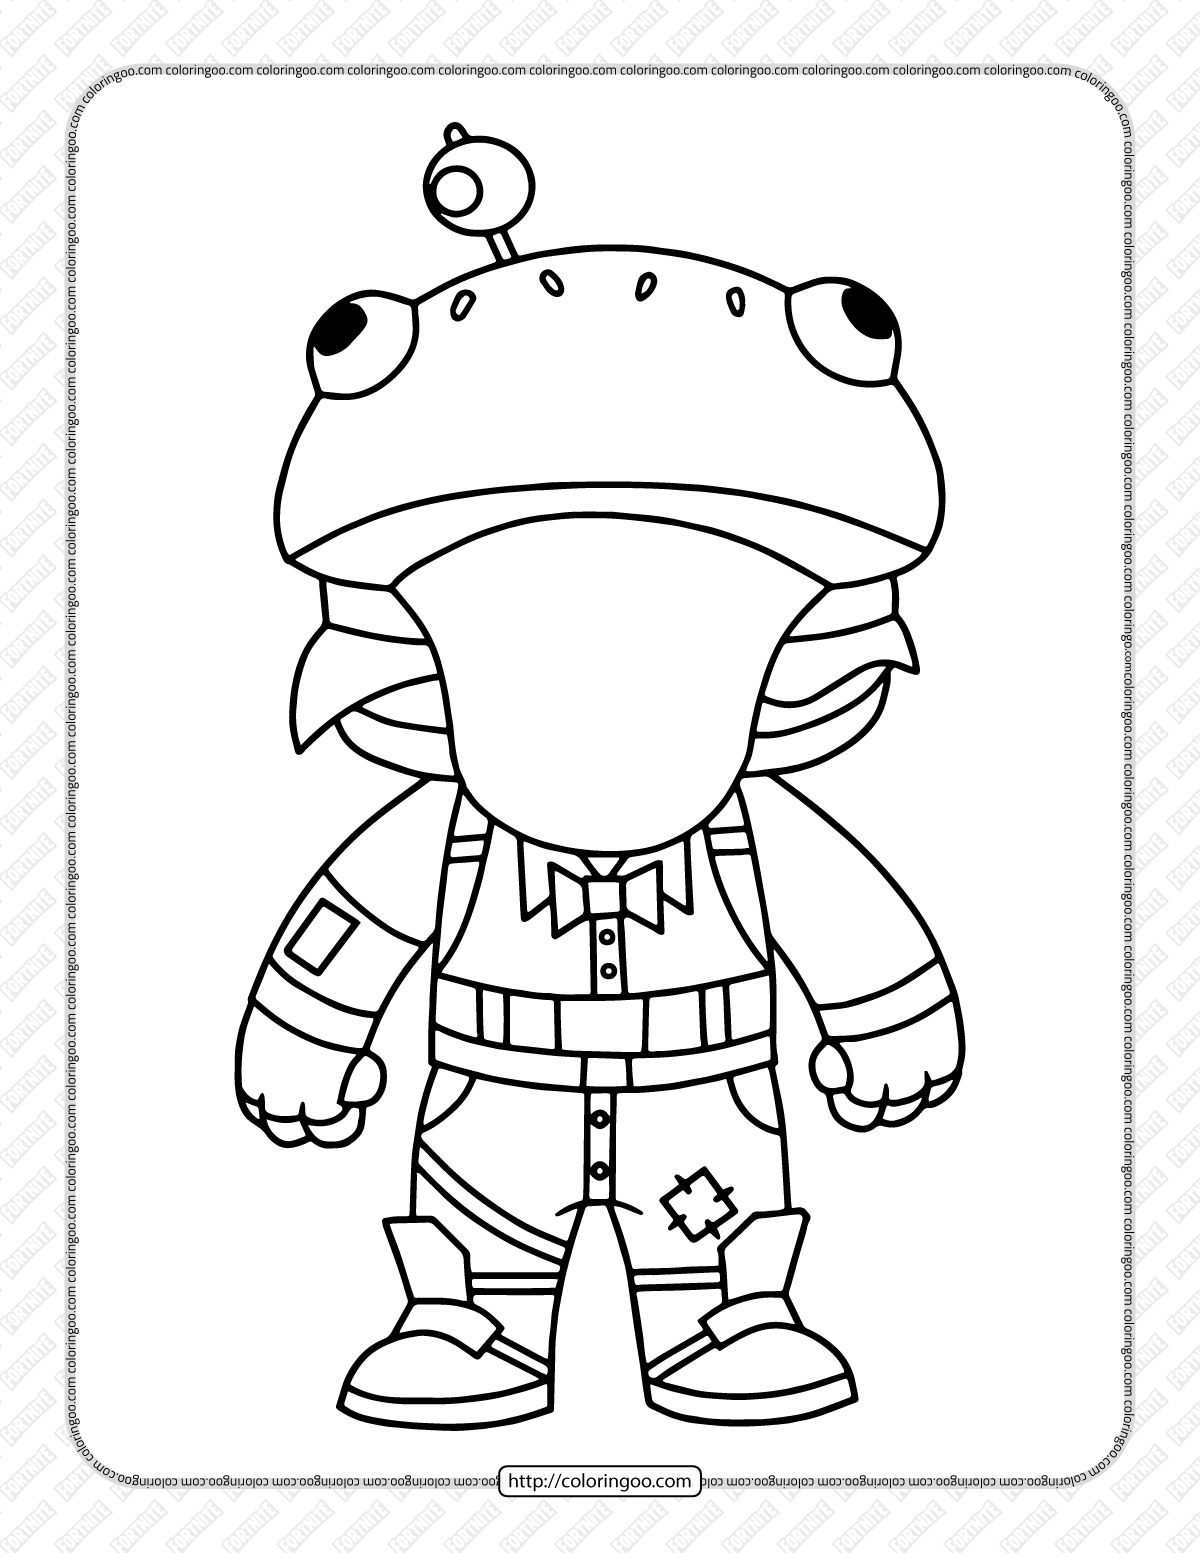 chibi fortnite coloring pages 06